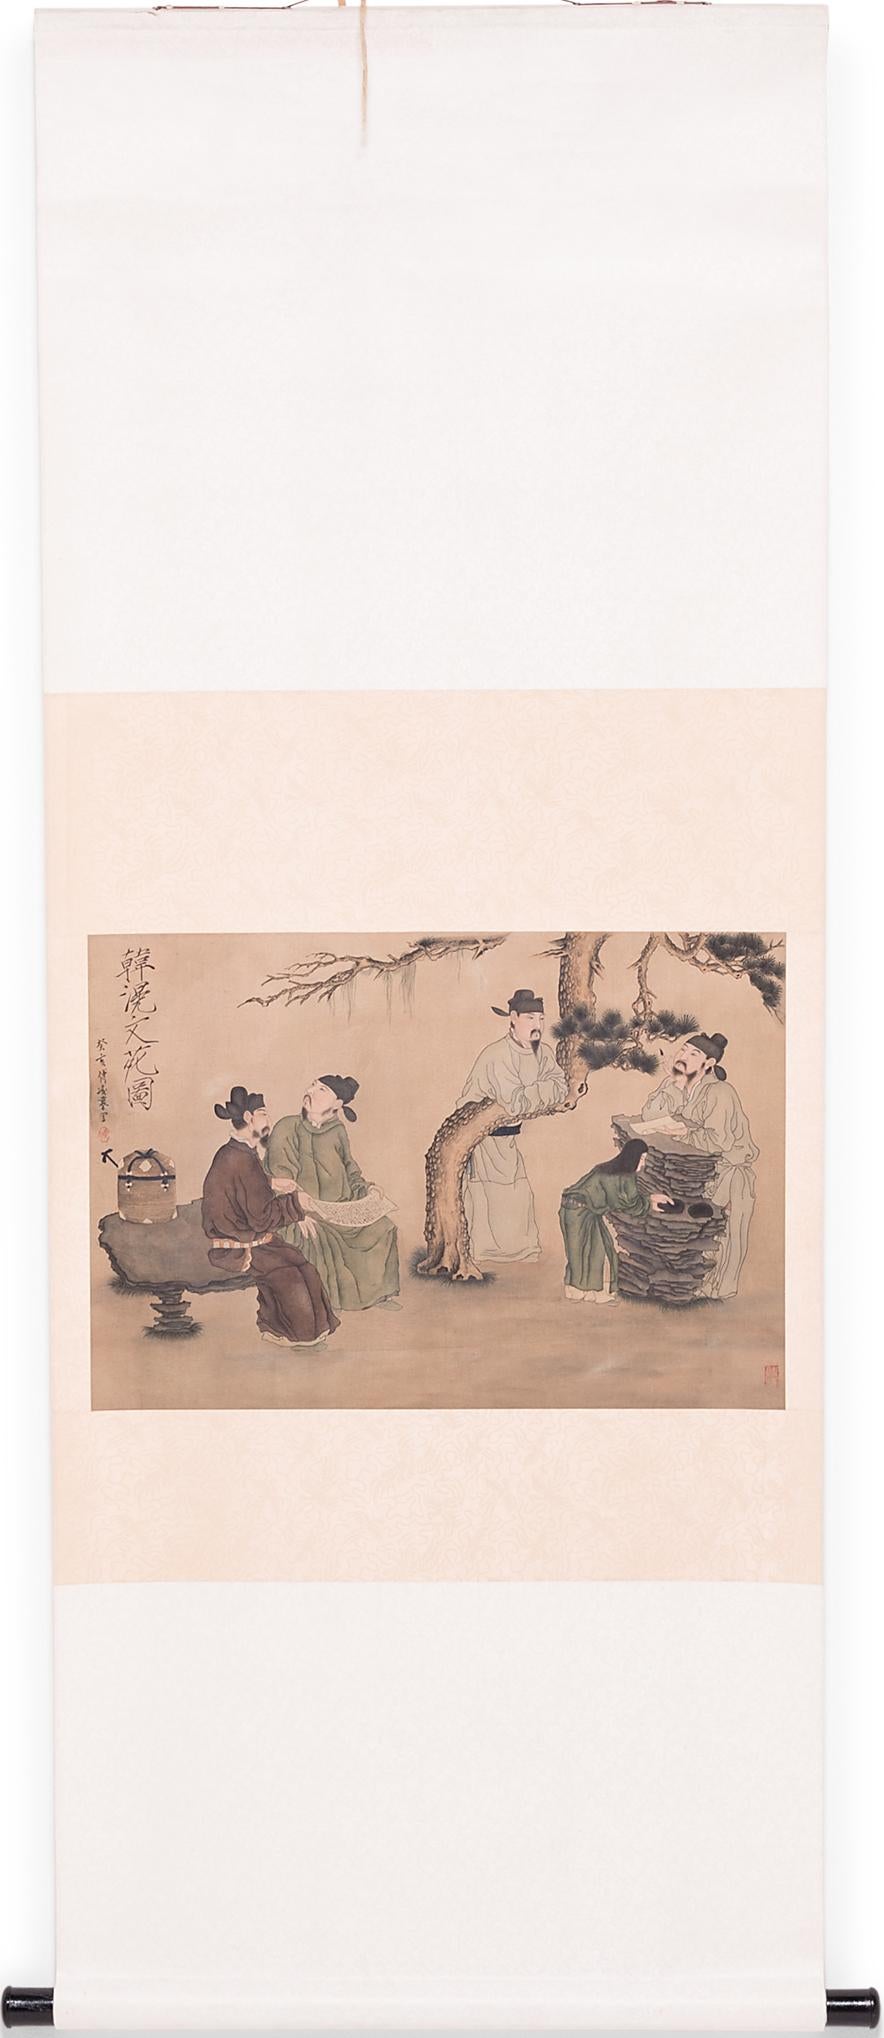 What is a scroll painting and how is it used?